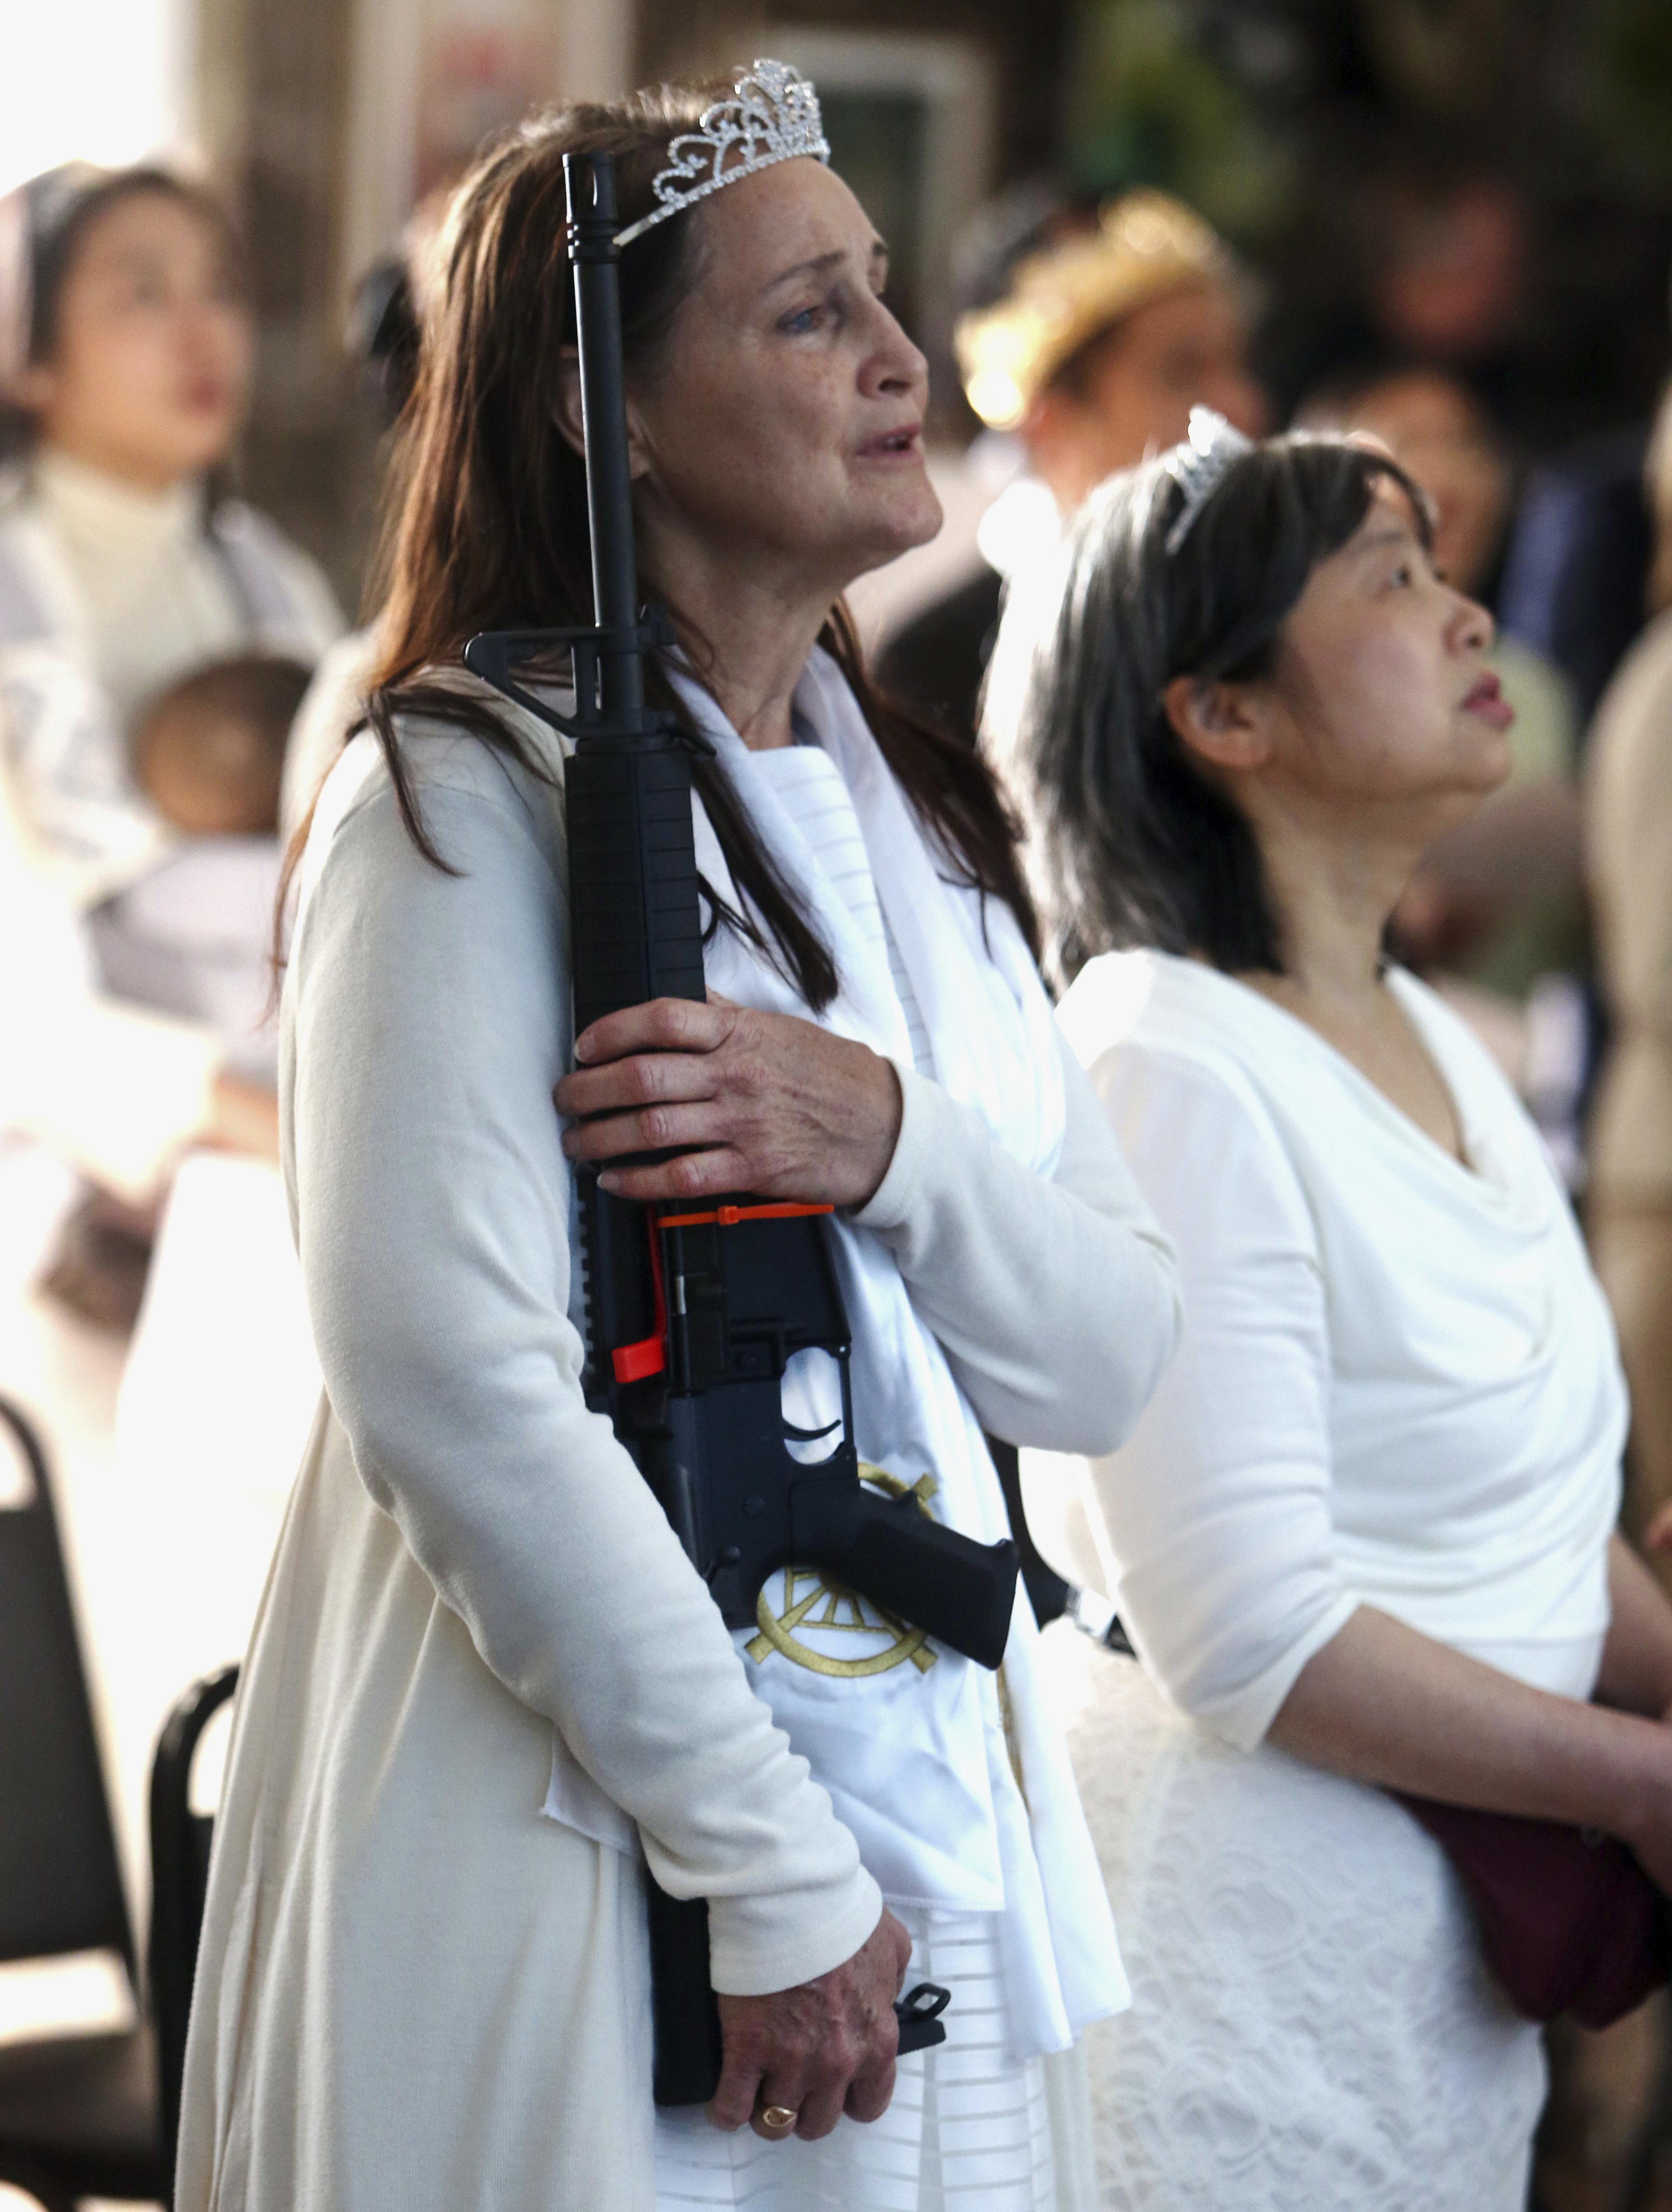 A woman sings the national anthem, while holding a weapon (Jacqueline Larma/AP)